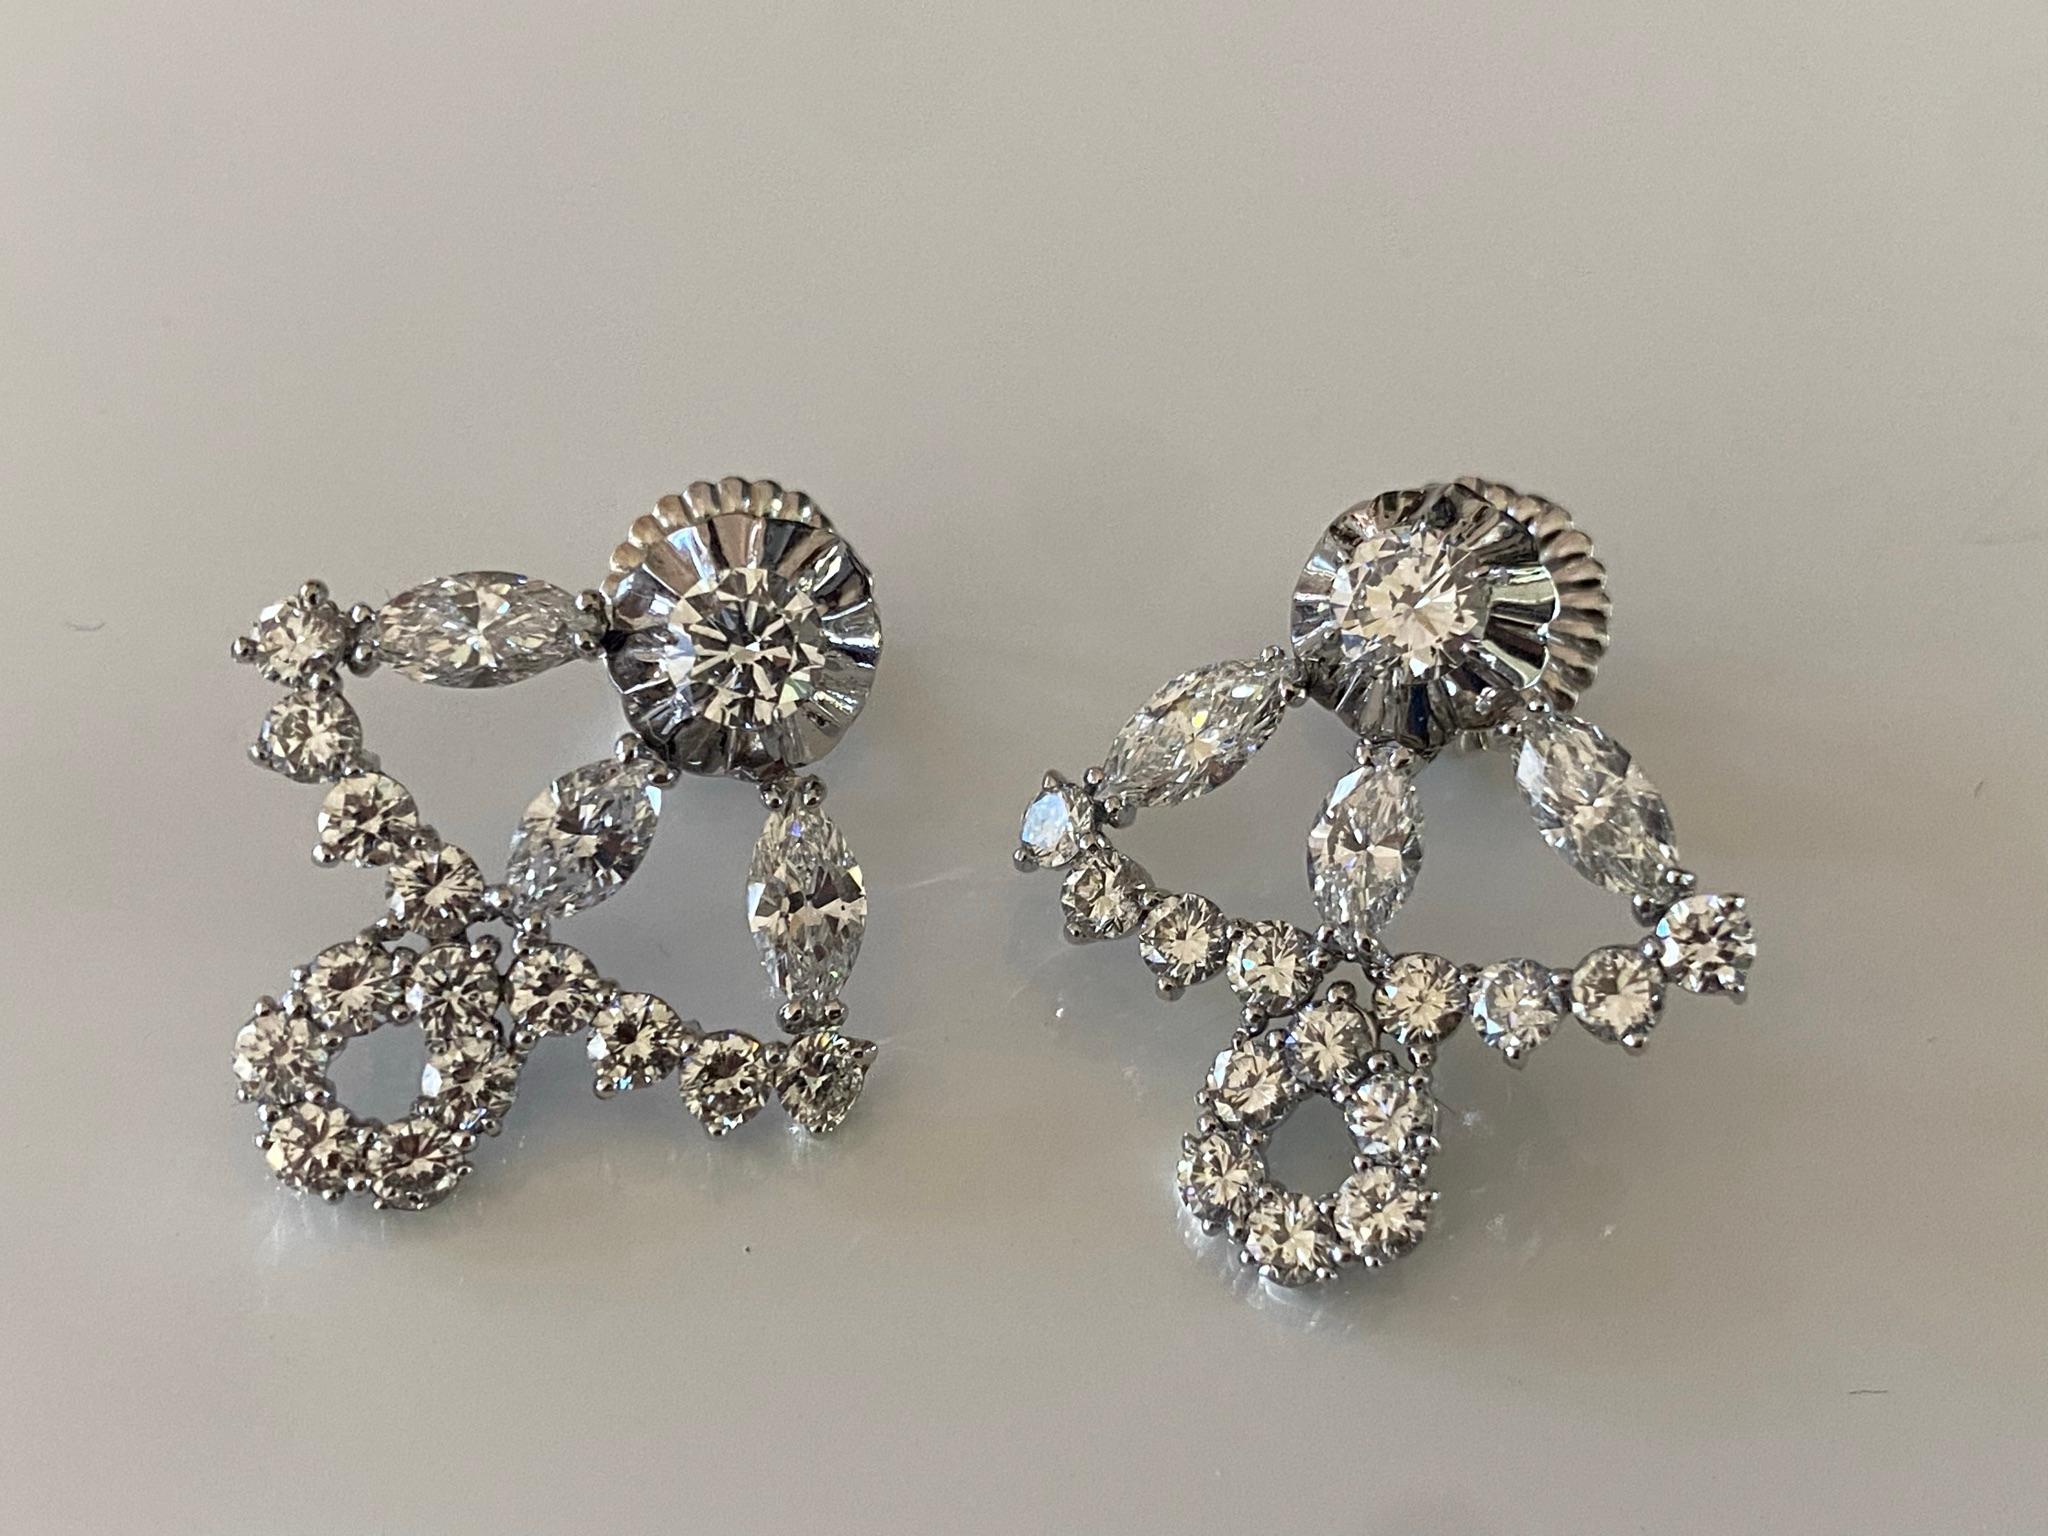 Exquisitely handcrafted in 18kt white gold, these custom-made 1920s Art Deco inspired earrings are designed around a dazzling array of round brilliant-cut and marquis-cut diamonds totaling 5.05 carats and measuring approximately 1 inch long. 
